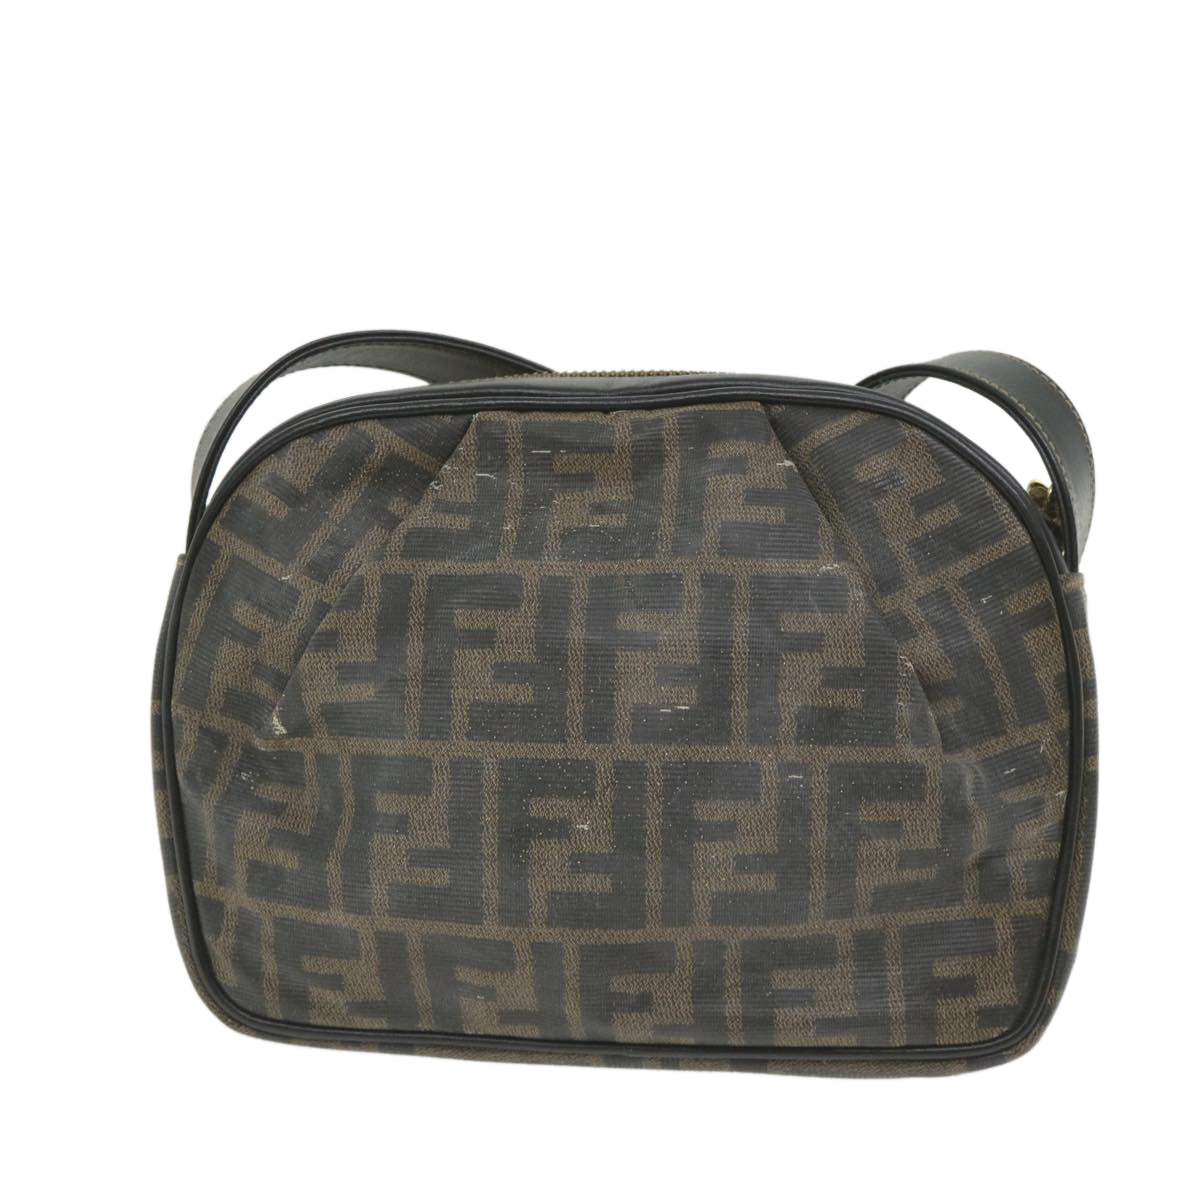 FENDI Zucca Canvas Shoulder Bag Coated Canvas Brown Auth bs9073